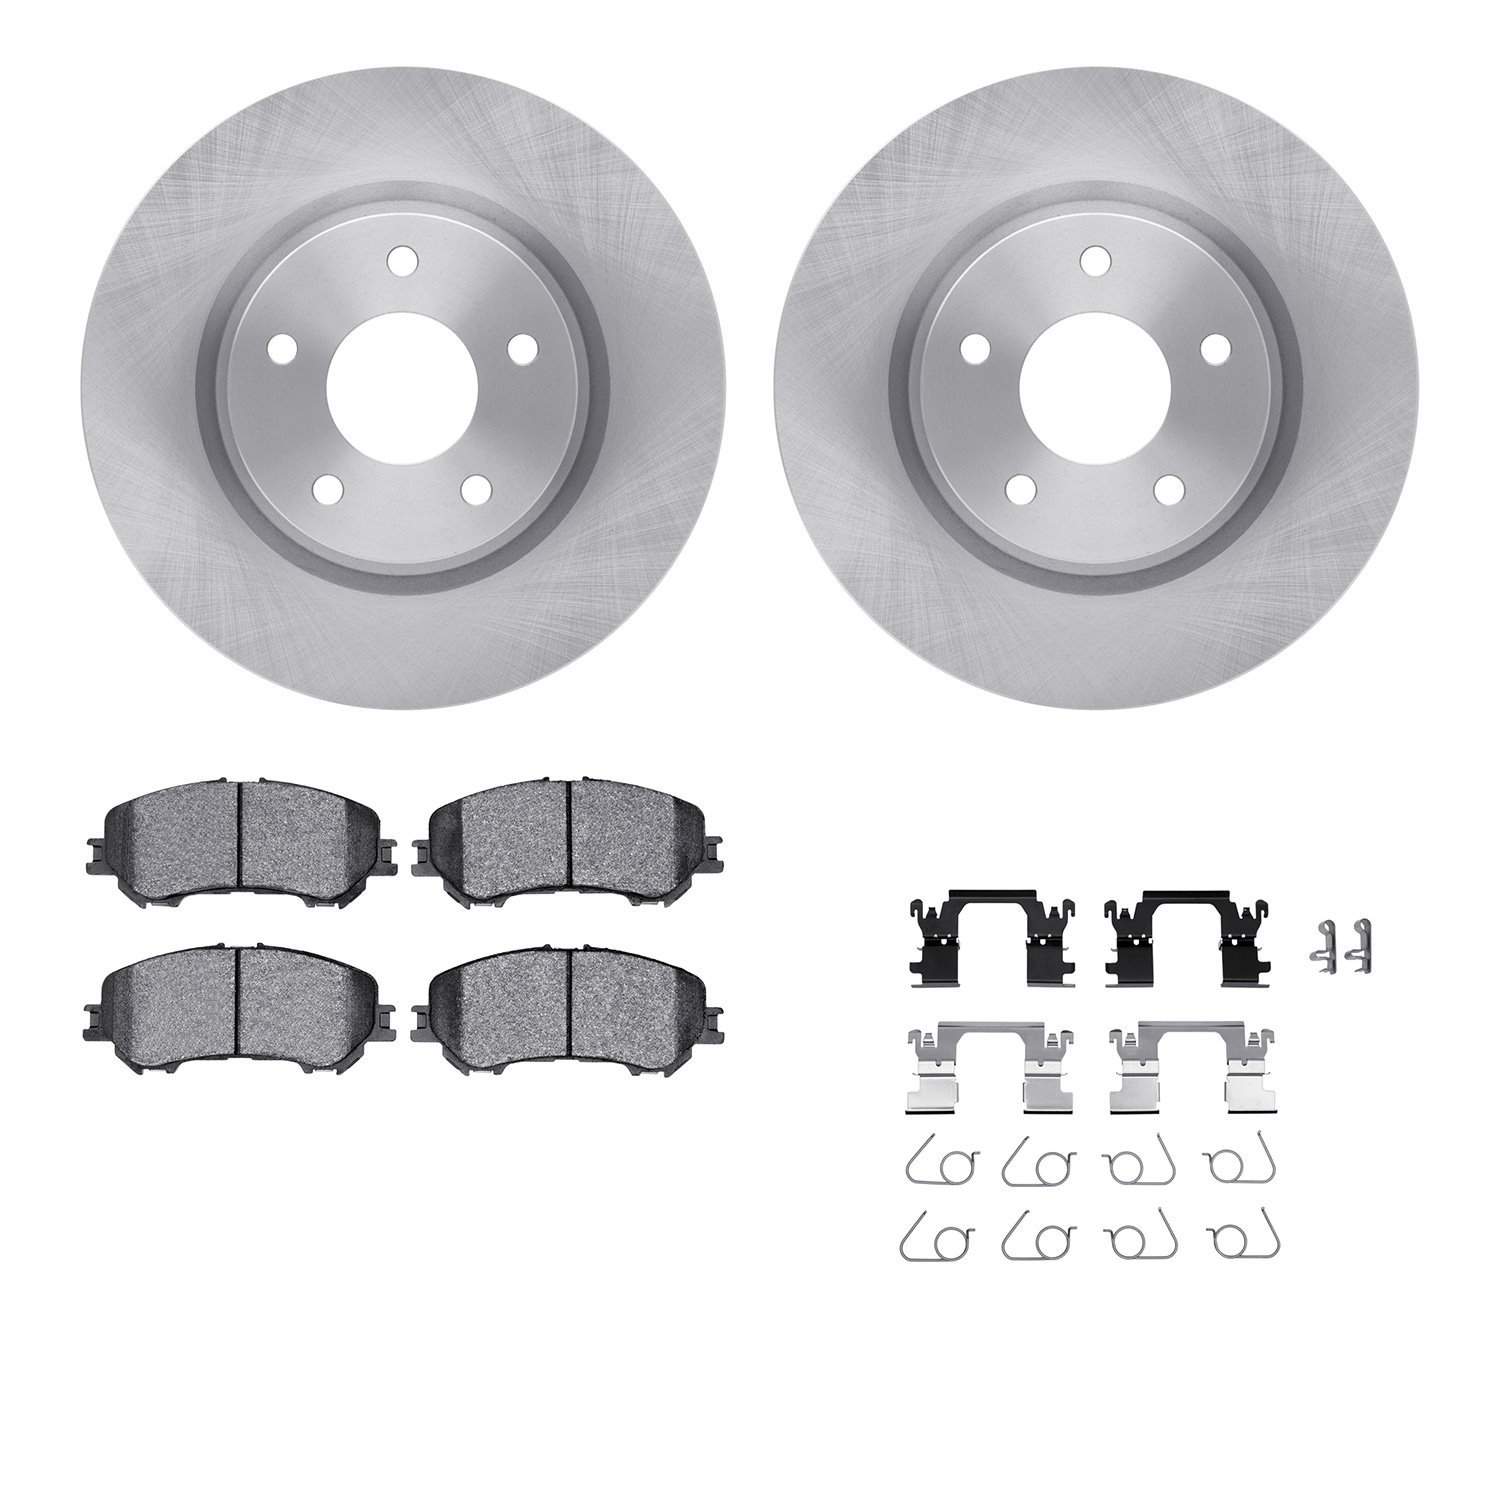 6612-67059 Brake Rotors w/5000 Euro Ceramic Brake Pads Kit with Hardware, Fits Select Multiple Makes/Models, Position: Front